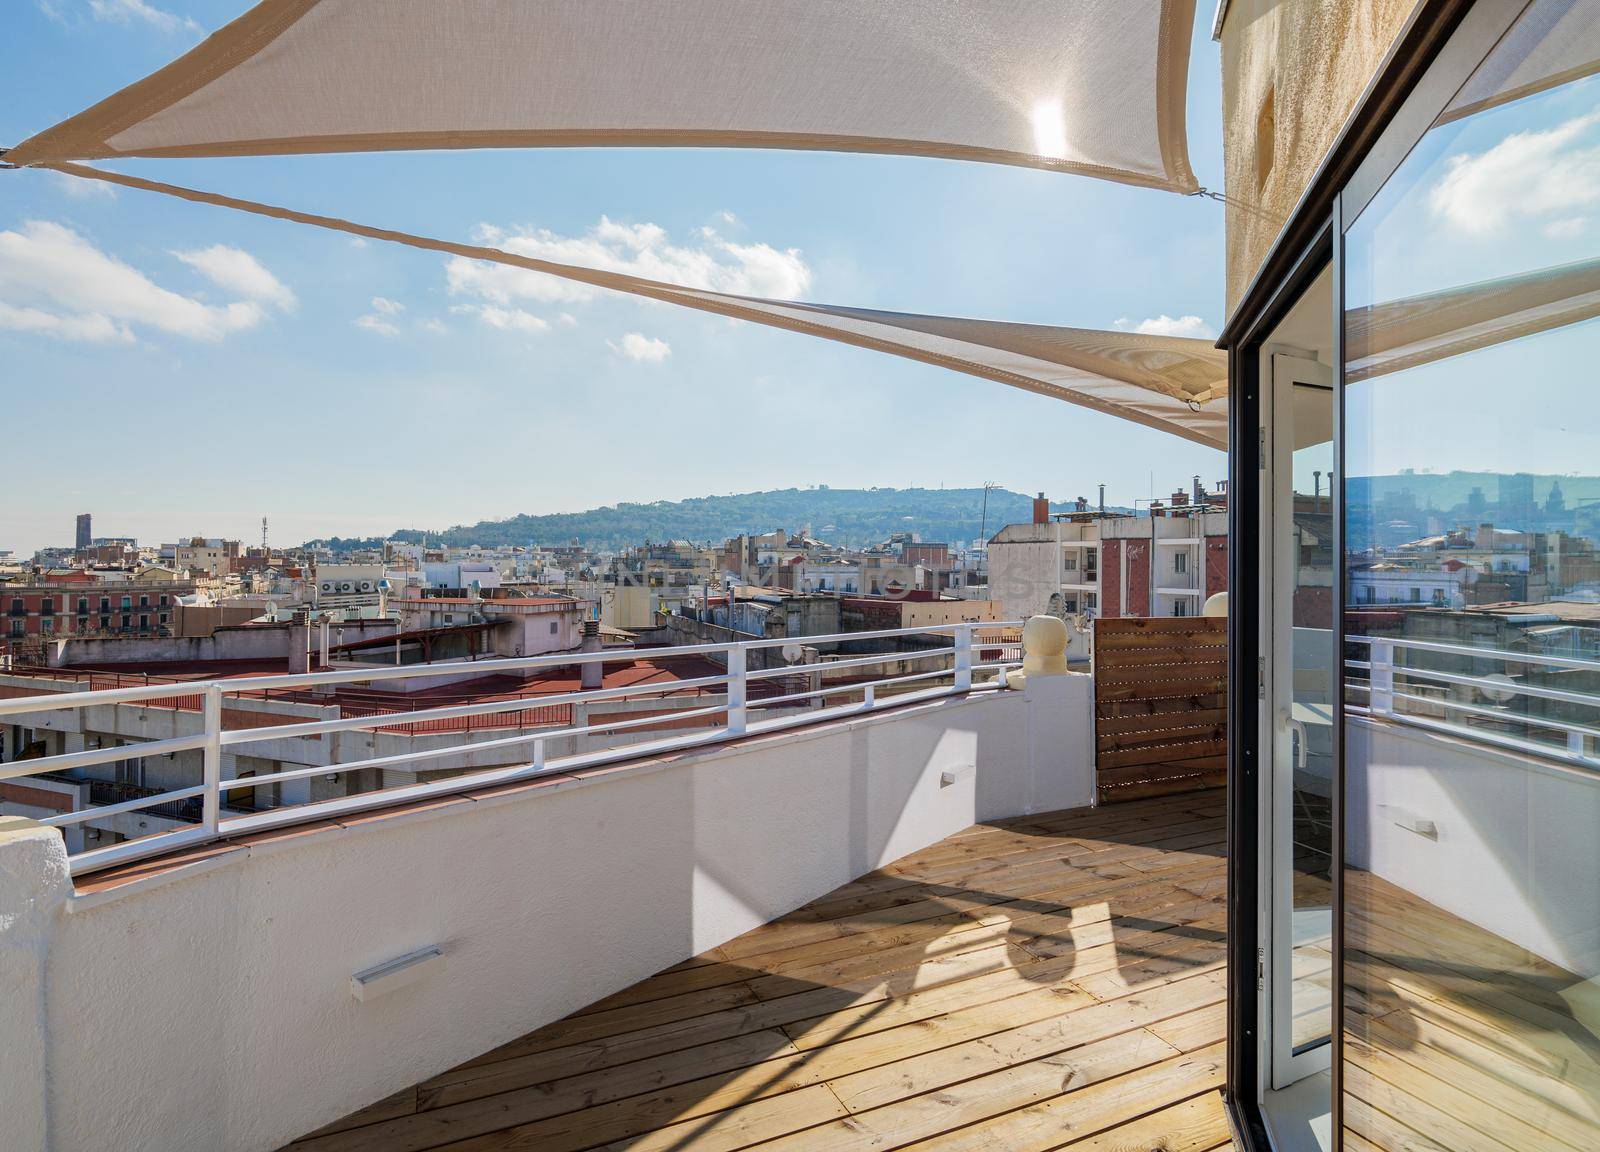 Sunny empty terrace with a sunshade. View to the hill and the city. Barcelona, Spain. by apavlin